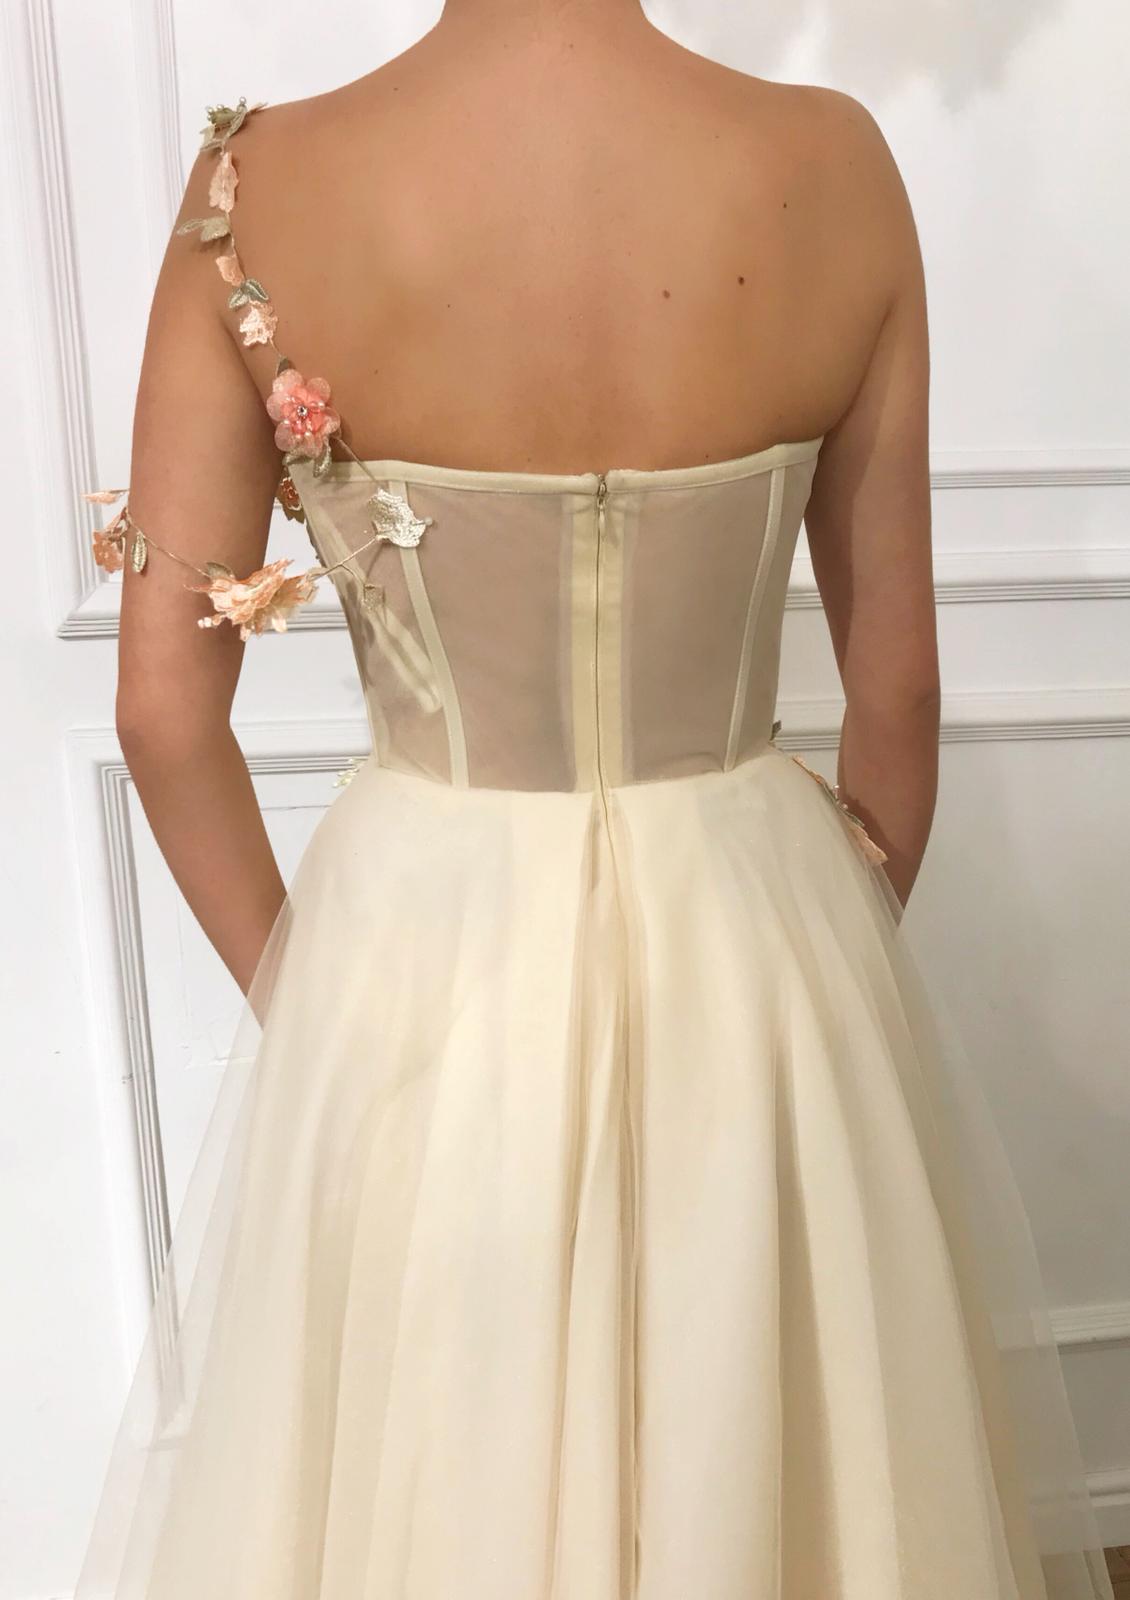 Beige A-Line dress with one shoulder and off the shoulder sleeve, v-neck and embroidered flowers